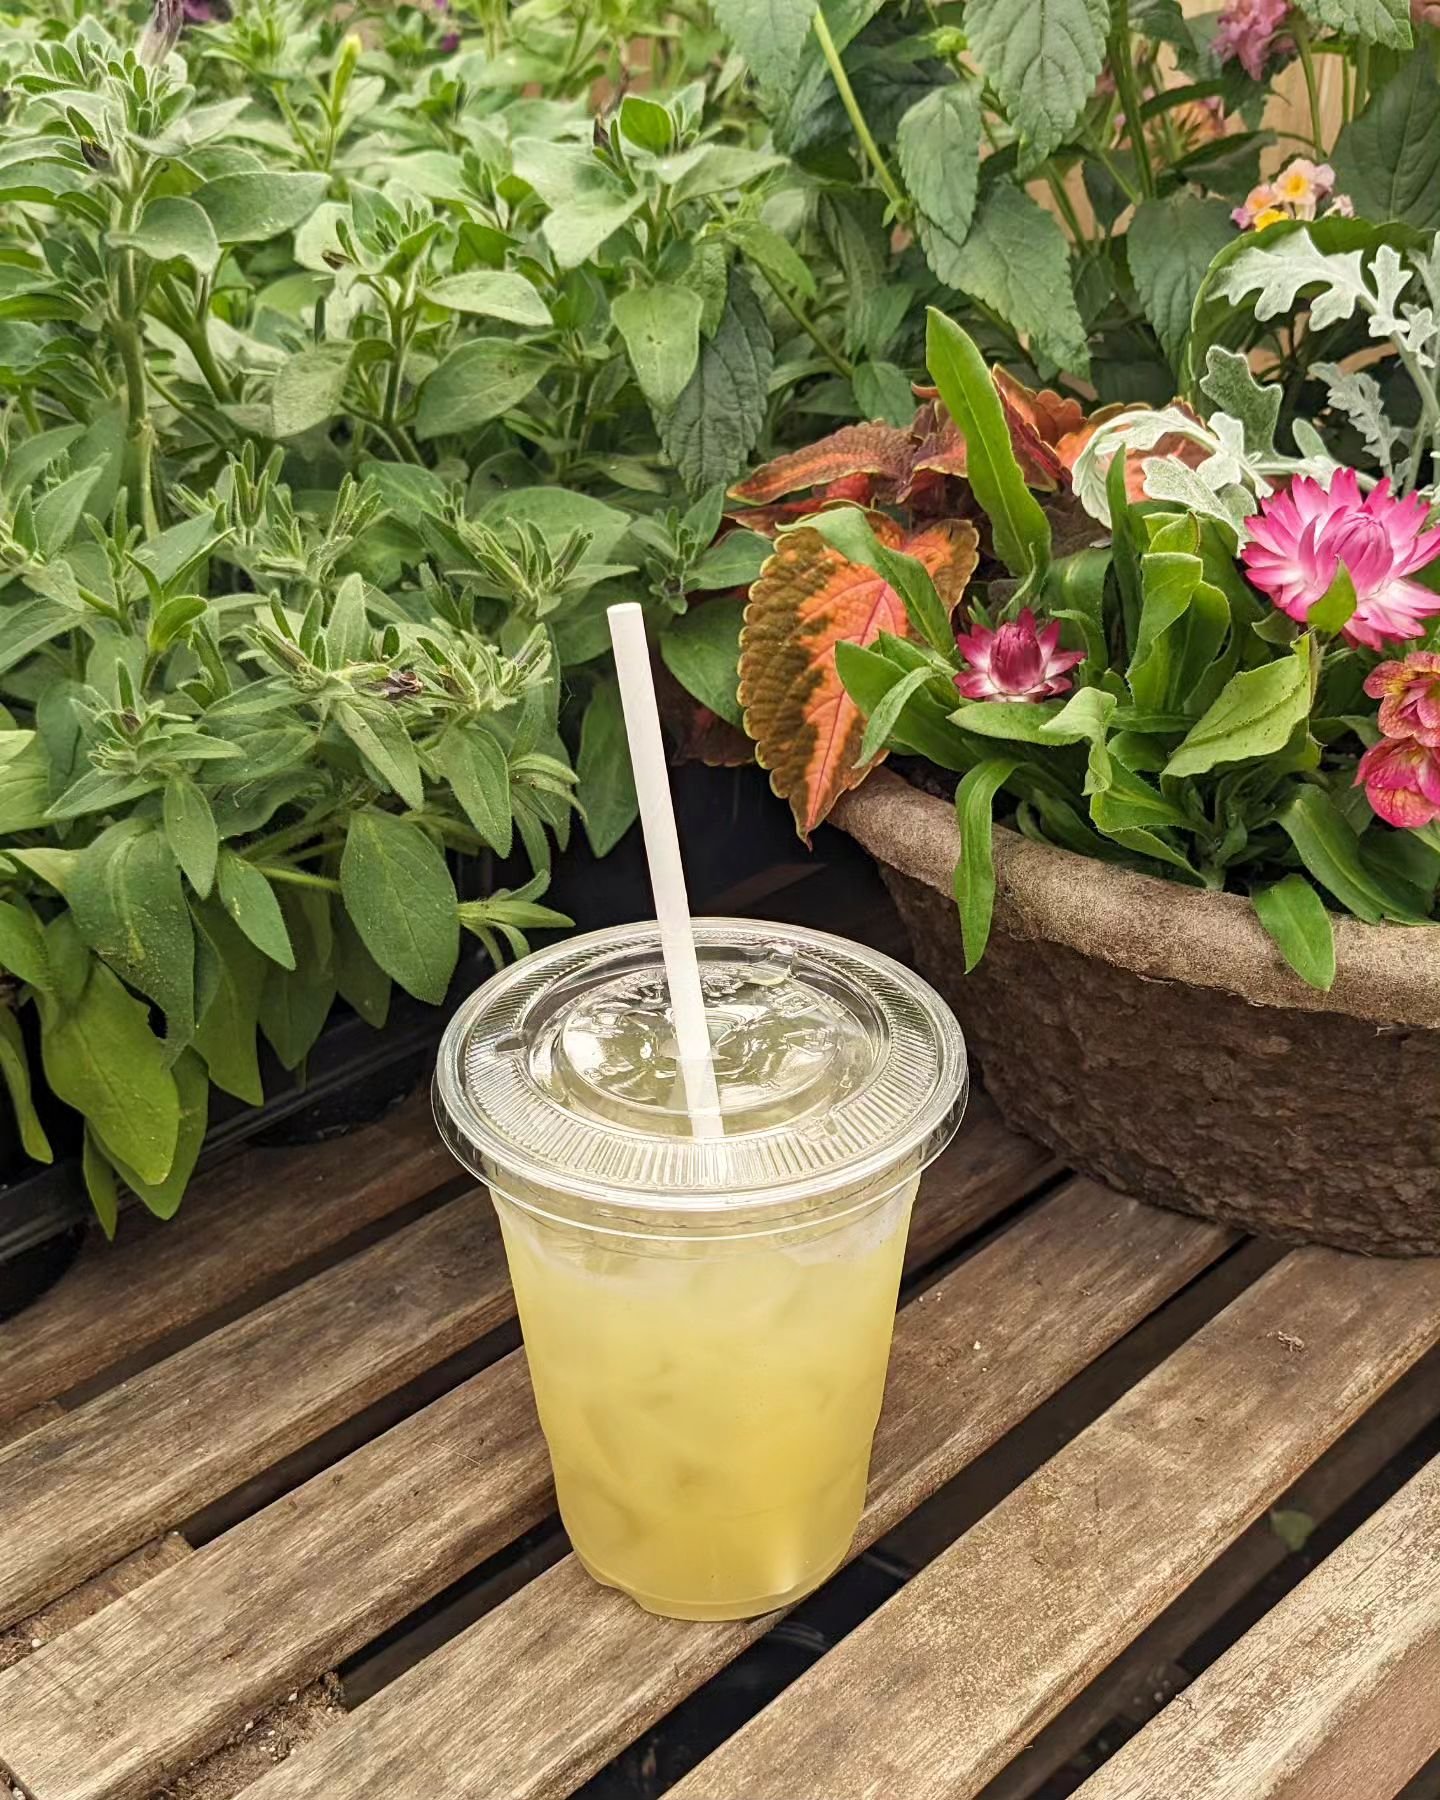 🚨🚨New Summer Drinks added to our event menu🚨🚨

🍍🍍Pineapple Sugarcane
🥥🥥 Coconut Sugarcane

They are available at Shipyard Night Market tomorrow. Come see us and grab your favorite Banh Mi and drink from 3-10pm 💃💃

#catering #foodtruckcateri